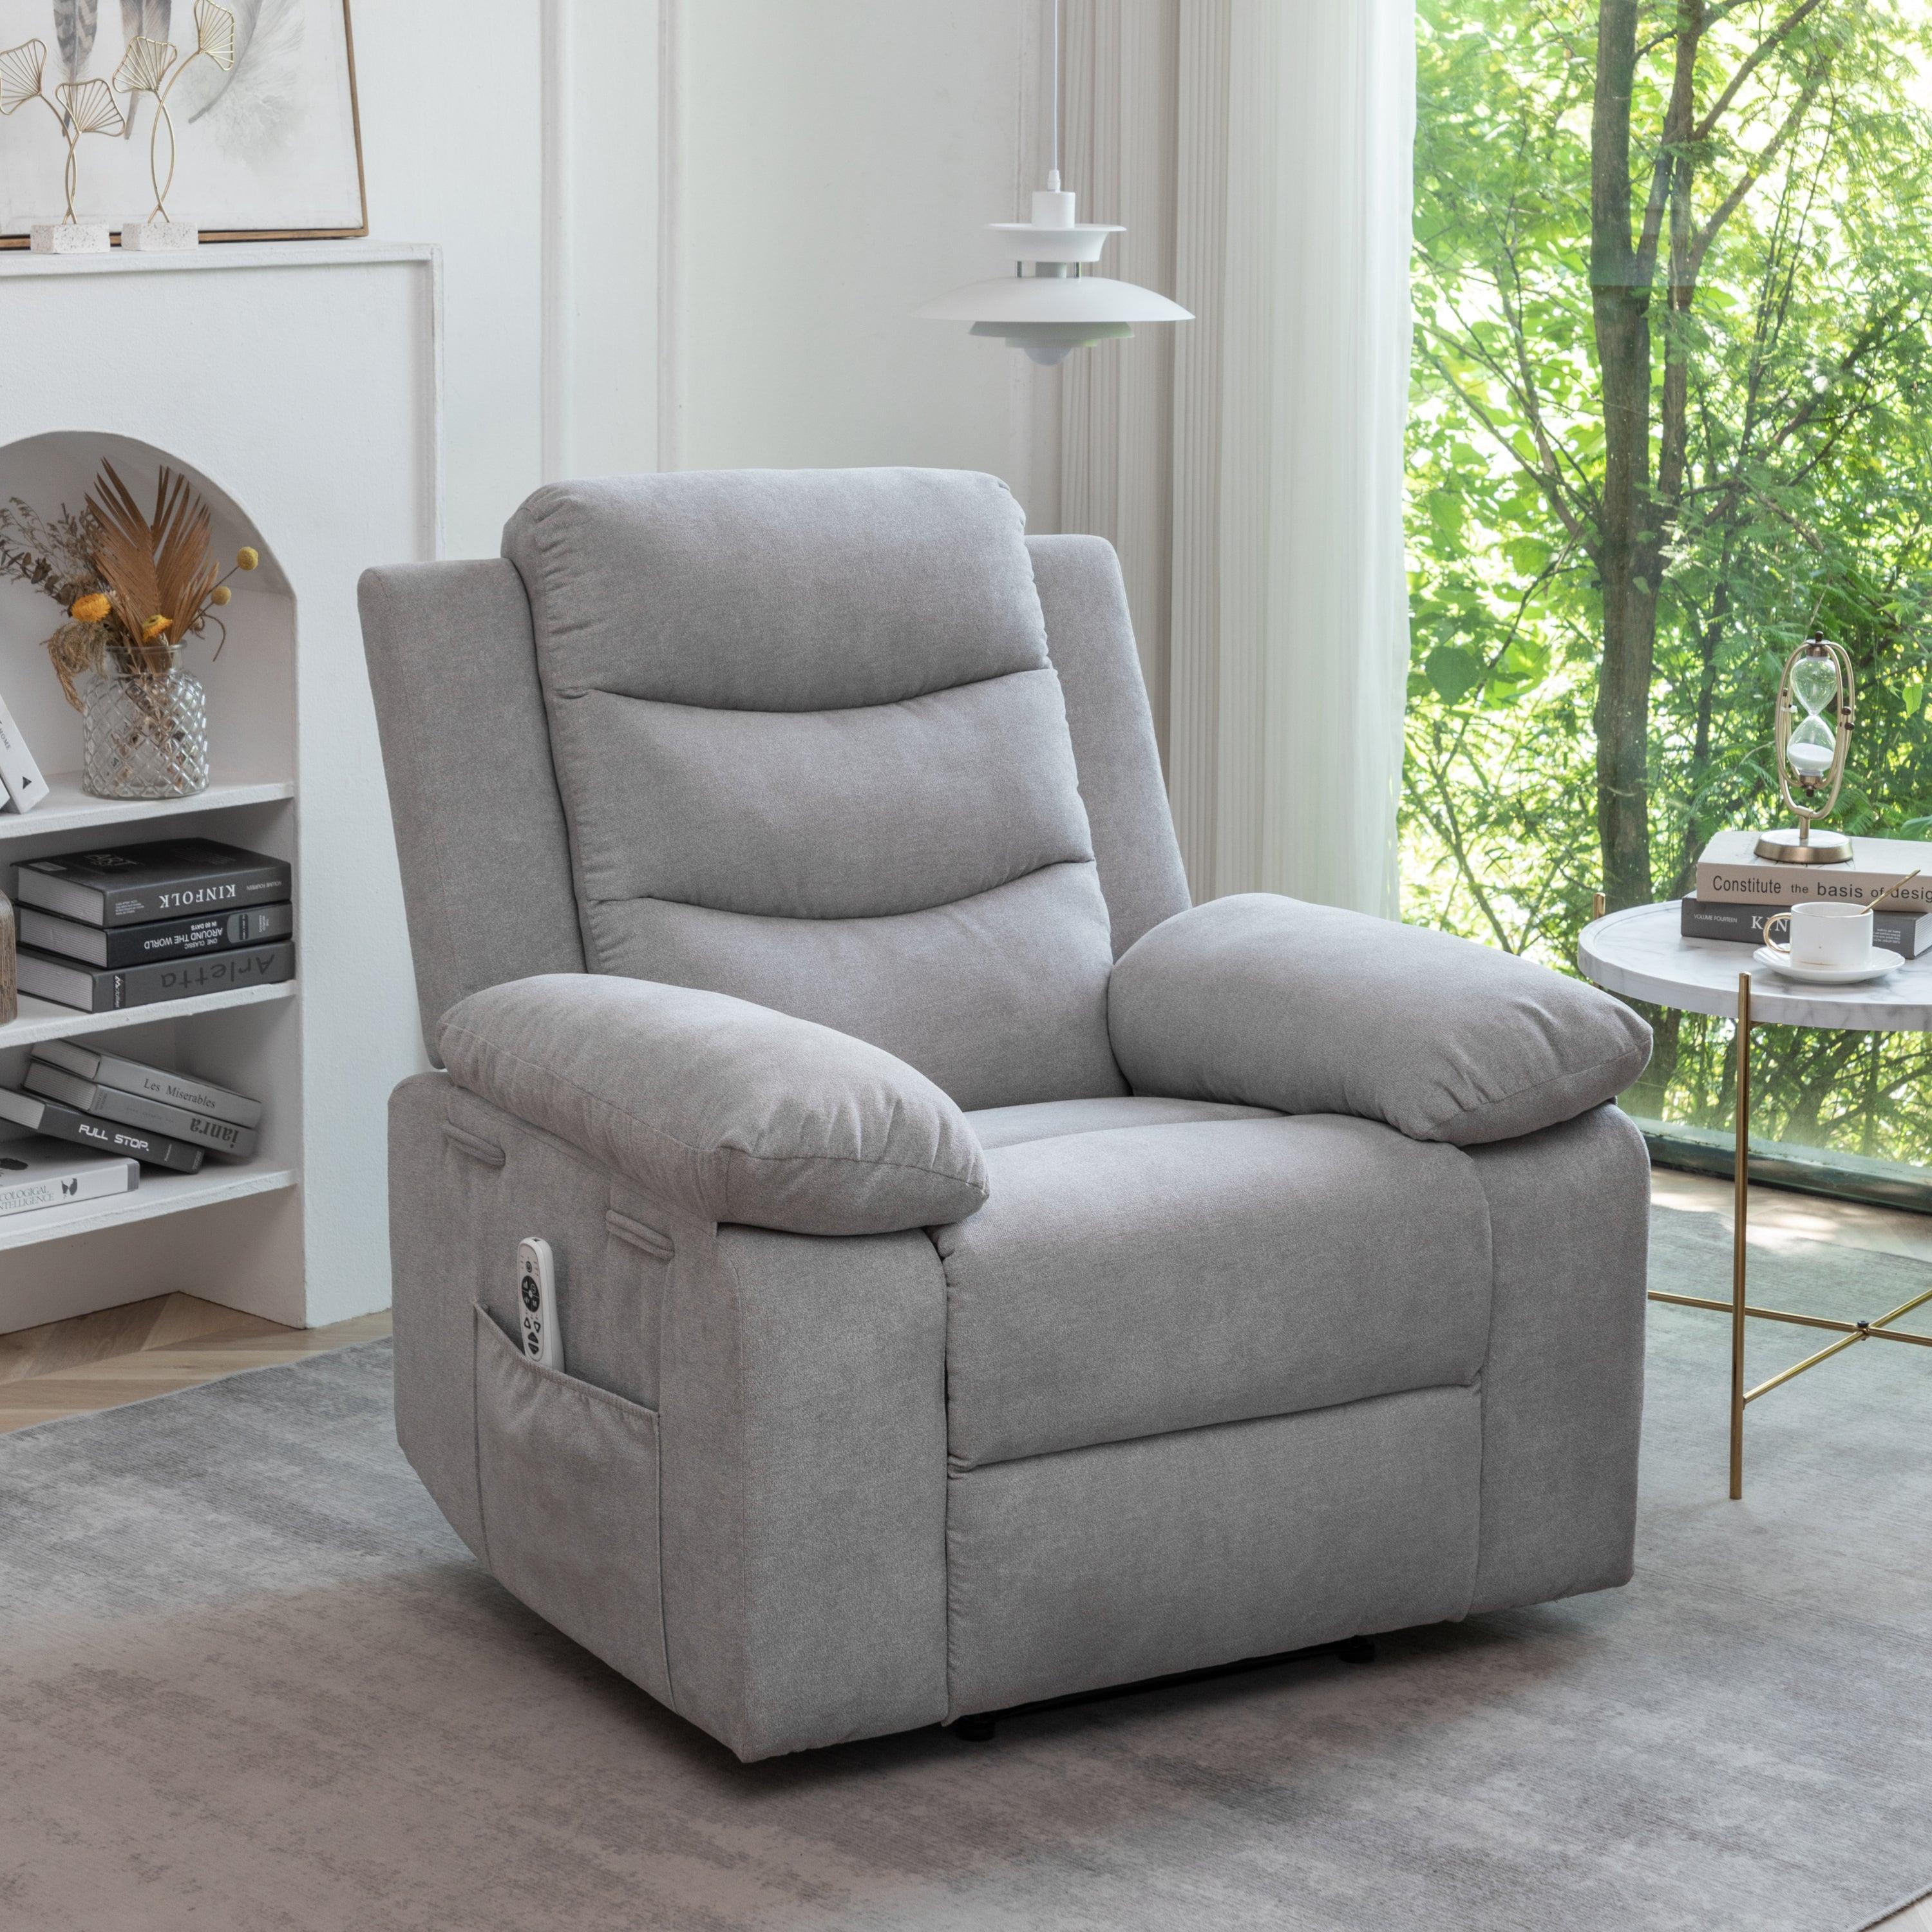 🆓🚛 Pustin Power Fabric Recliner Chair With Adjustable Massage Functions - Light Gray